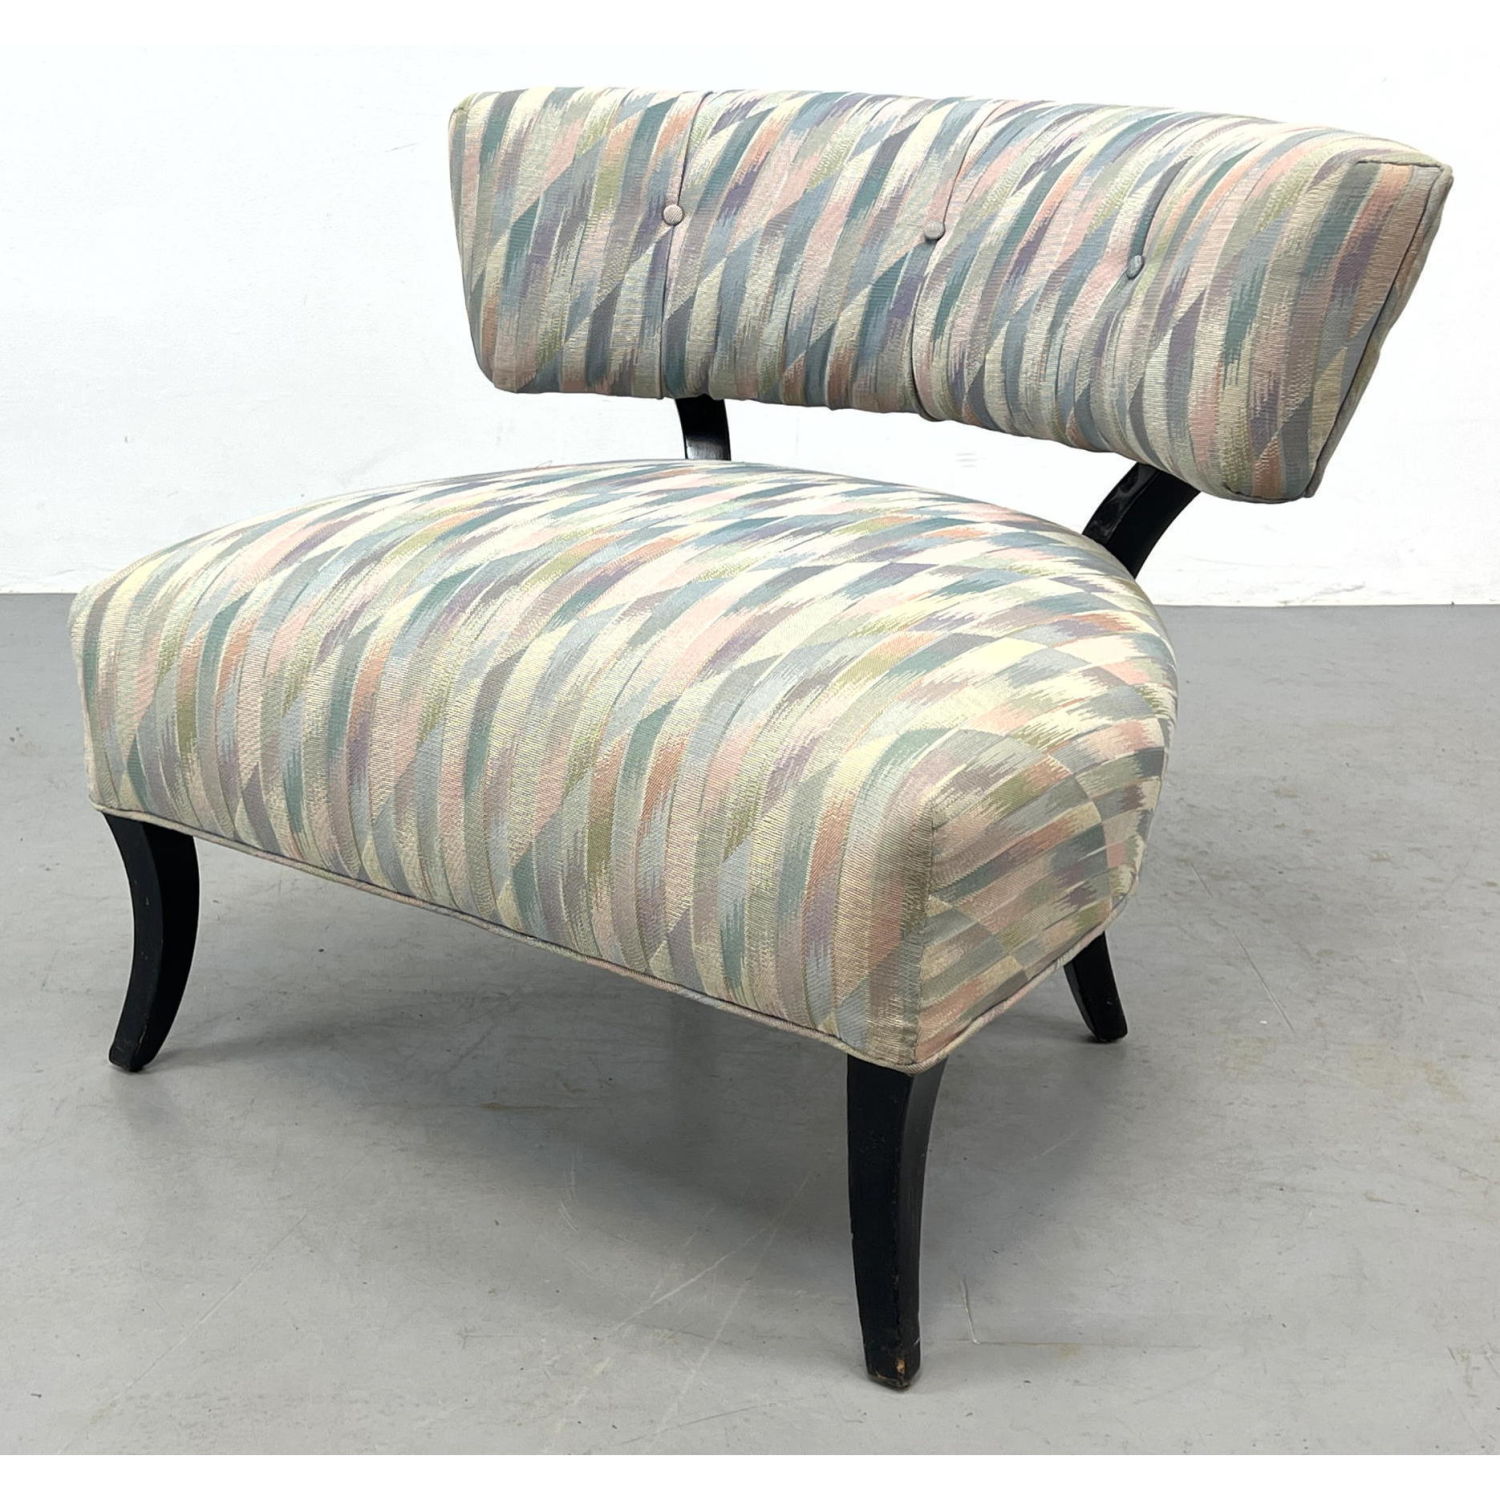 Modernist Upholstered Lounge Chair.